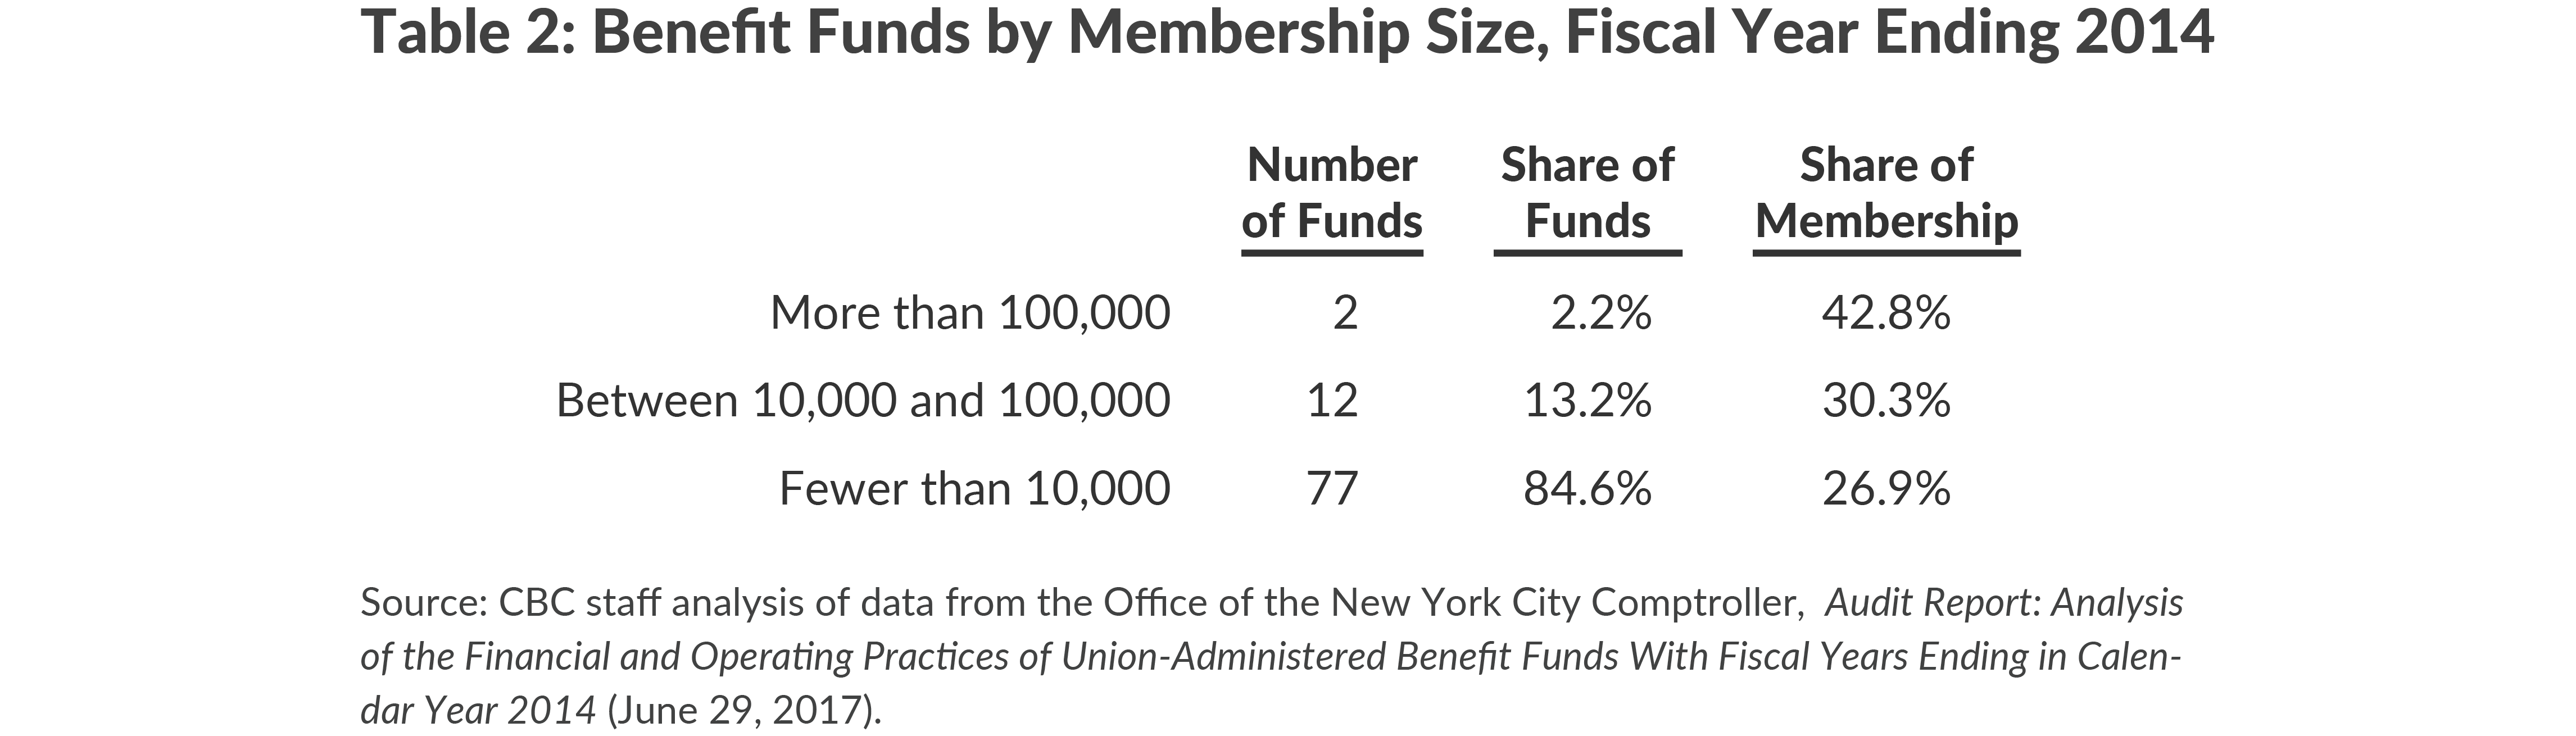 Table 2: Benefit Funds by Membership Size, Fiscal Year Ending 2014